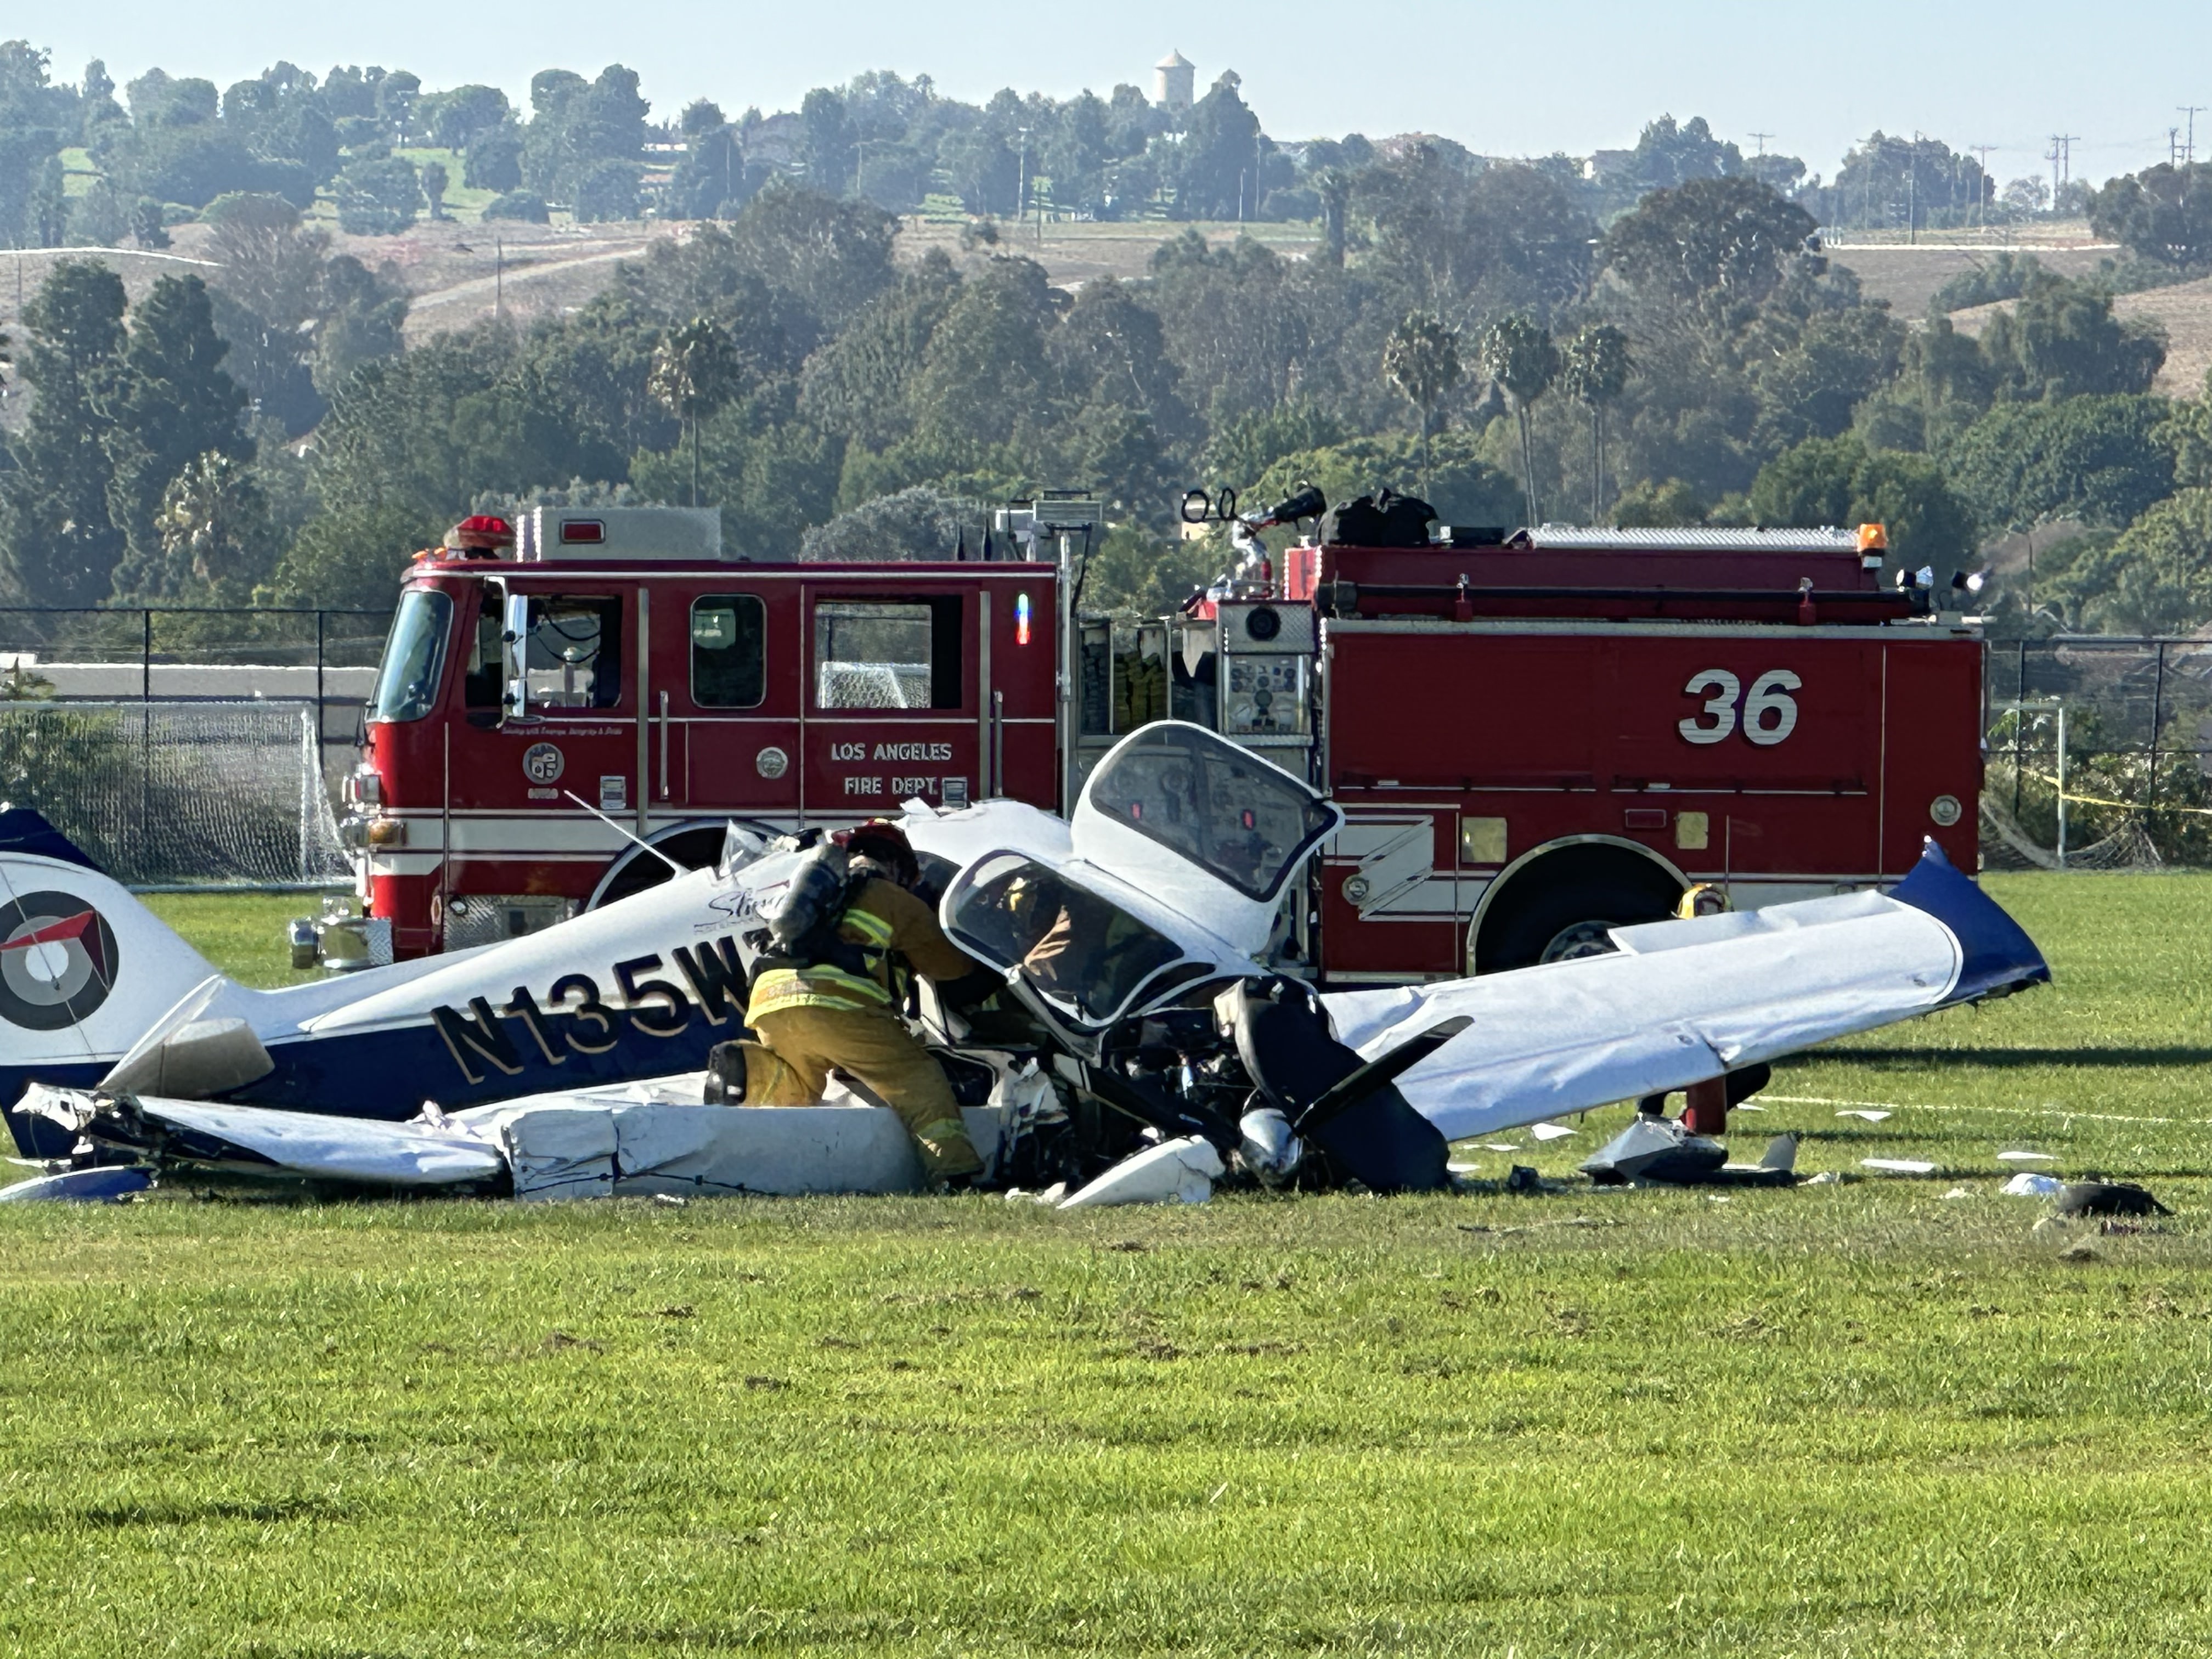 small plane crashed on grass with fire engine in the background